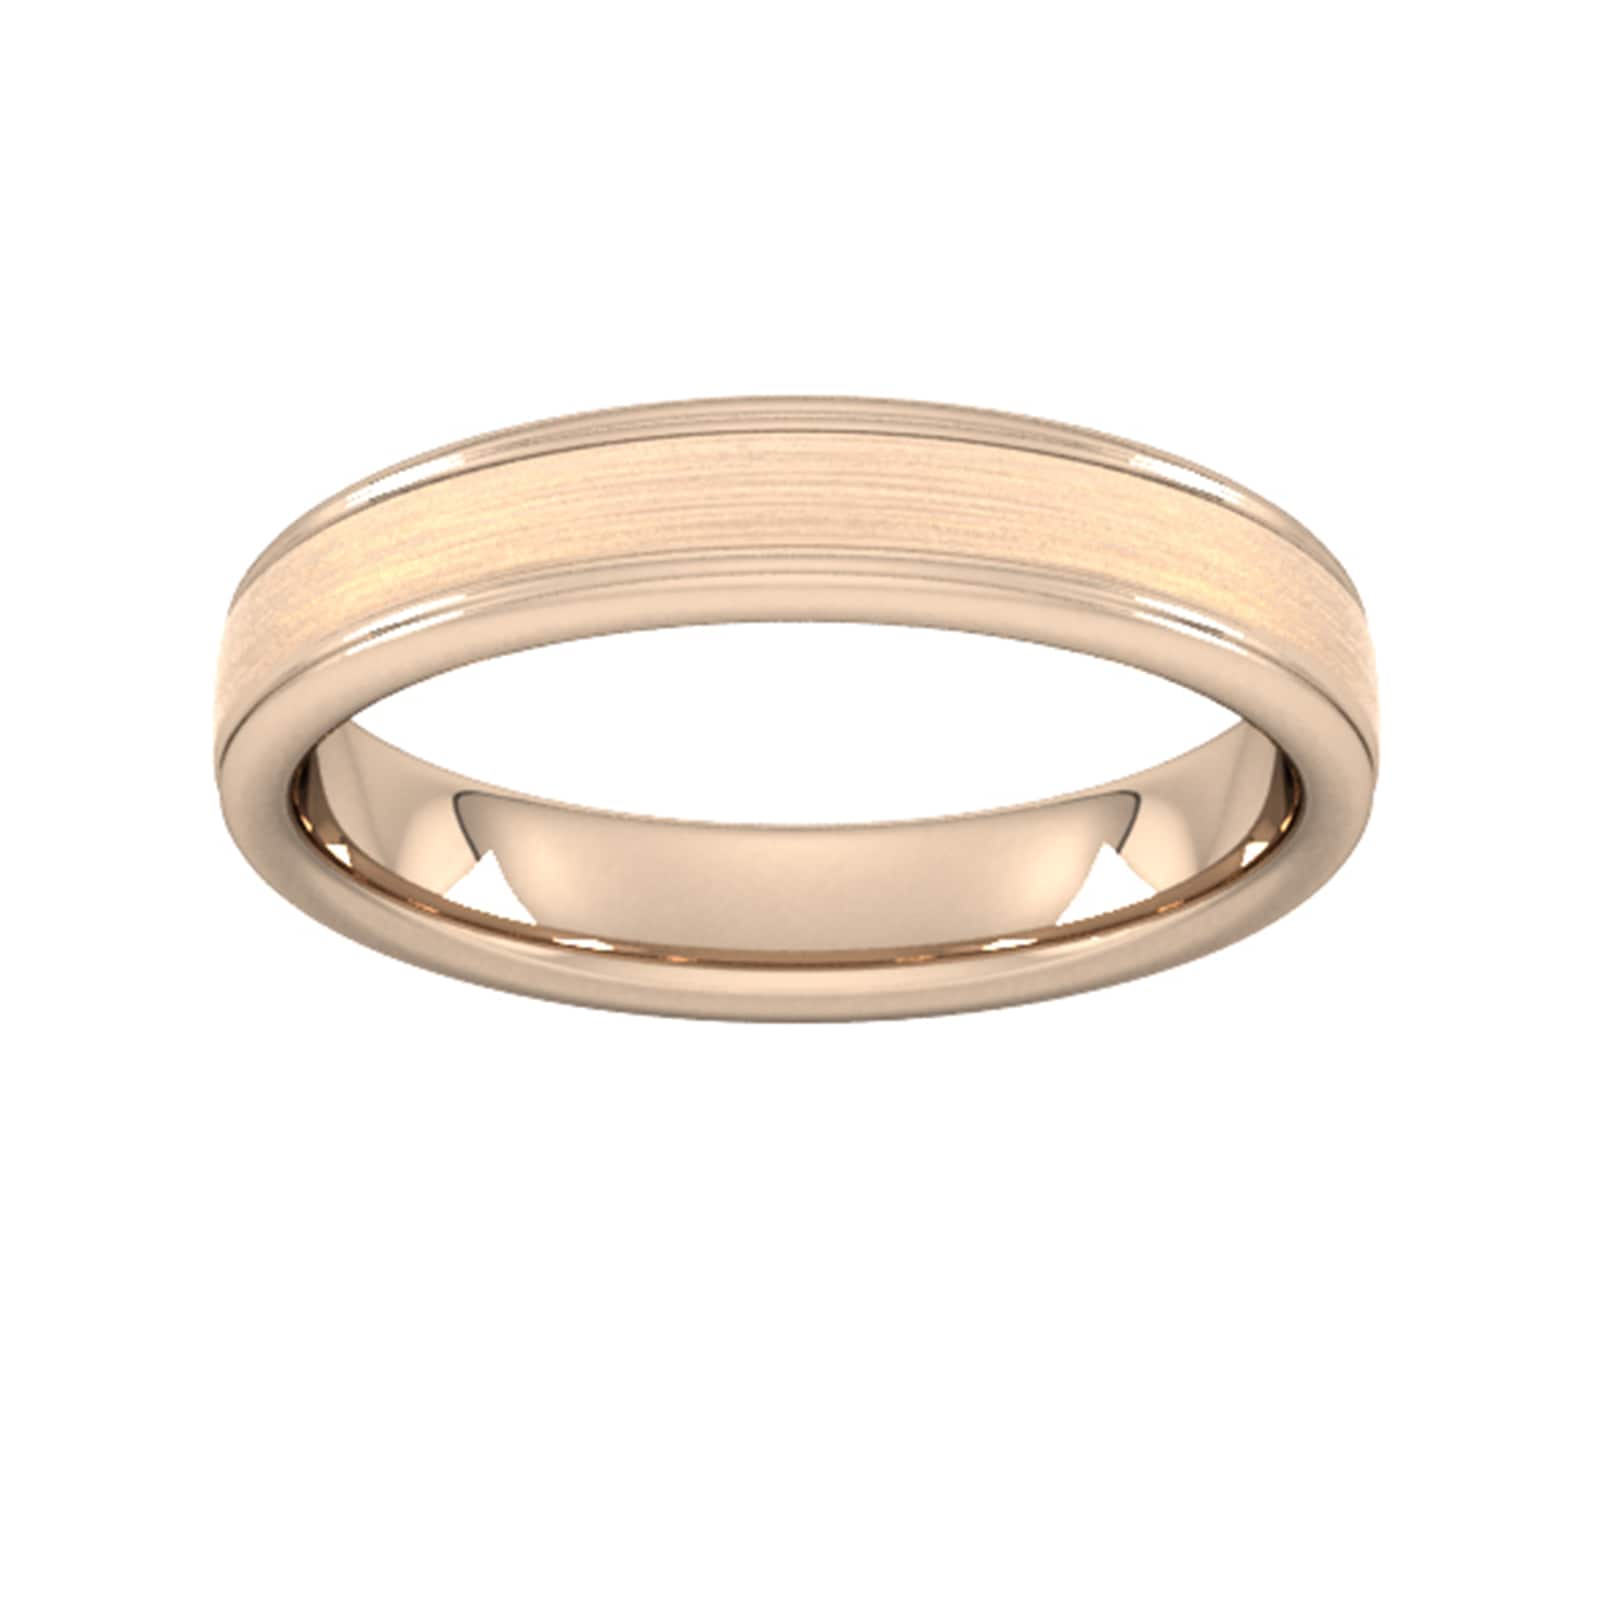 4mm Slight Court Heavy Matt Centre With Grooves Wedding Ring In 18 Carat Rose Gold - Ring Size S